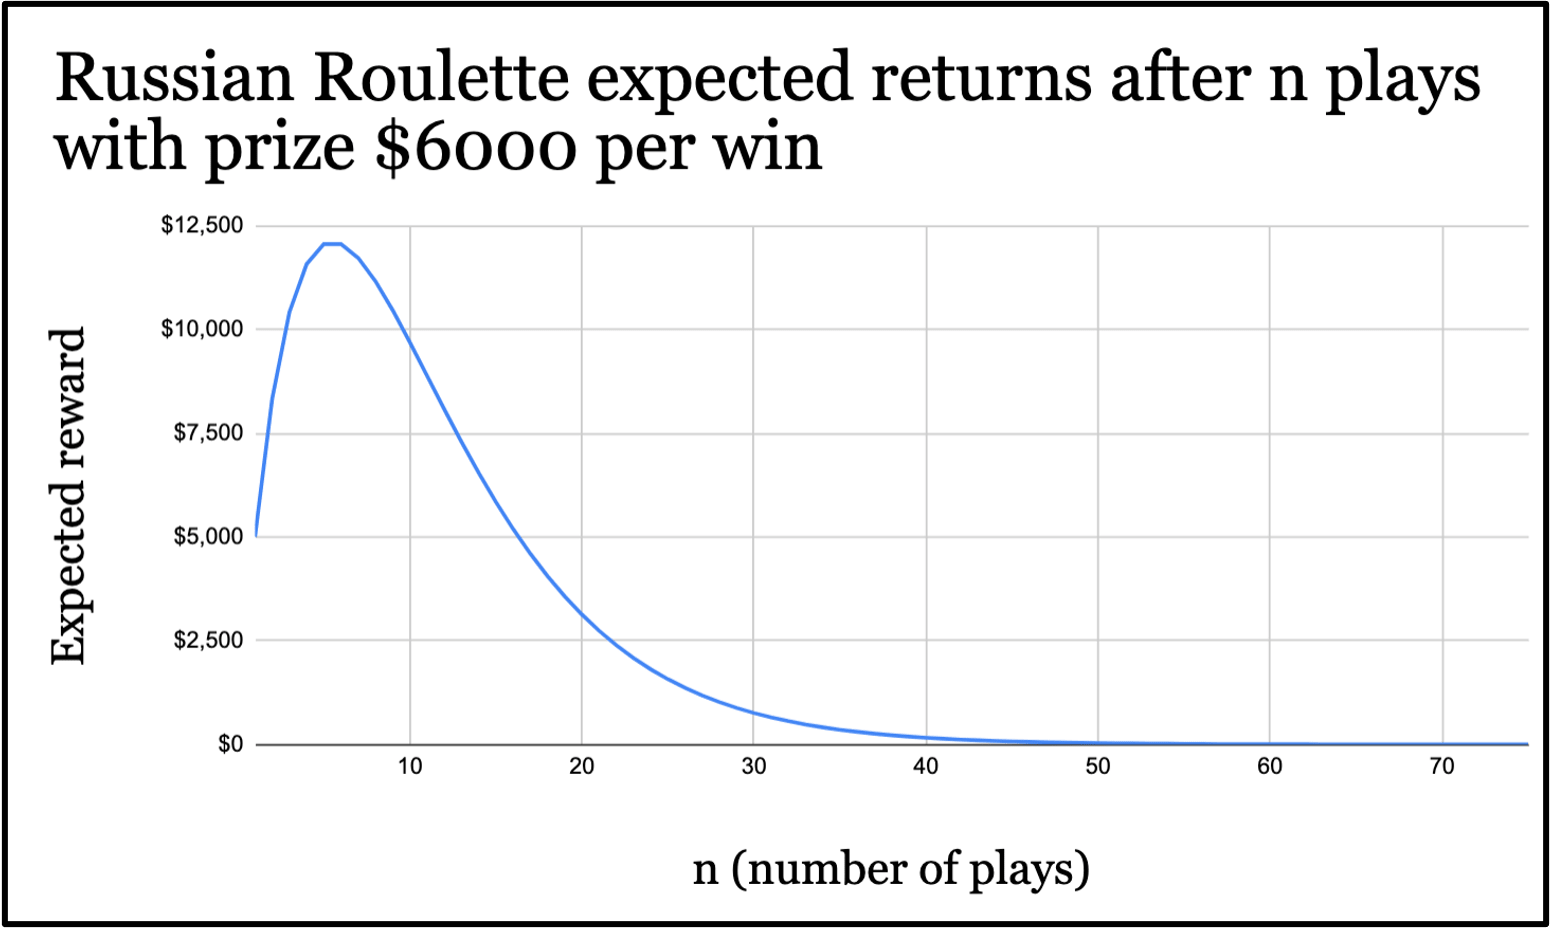 The expected returns of playing Russian Roulette